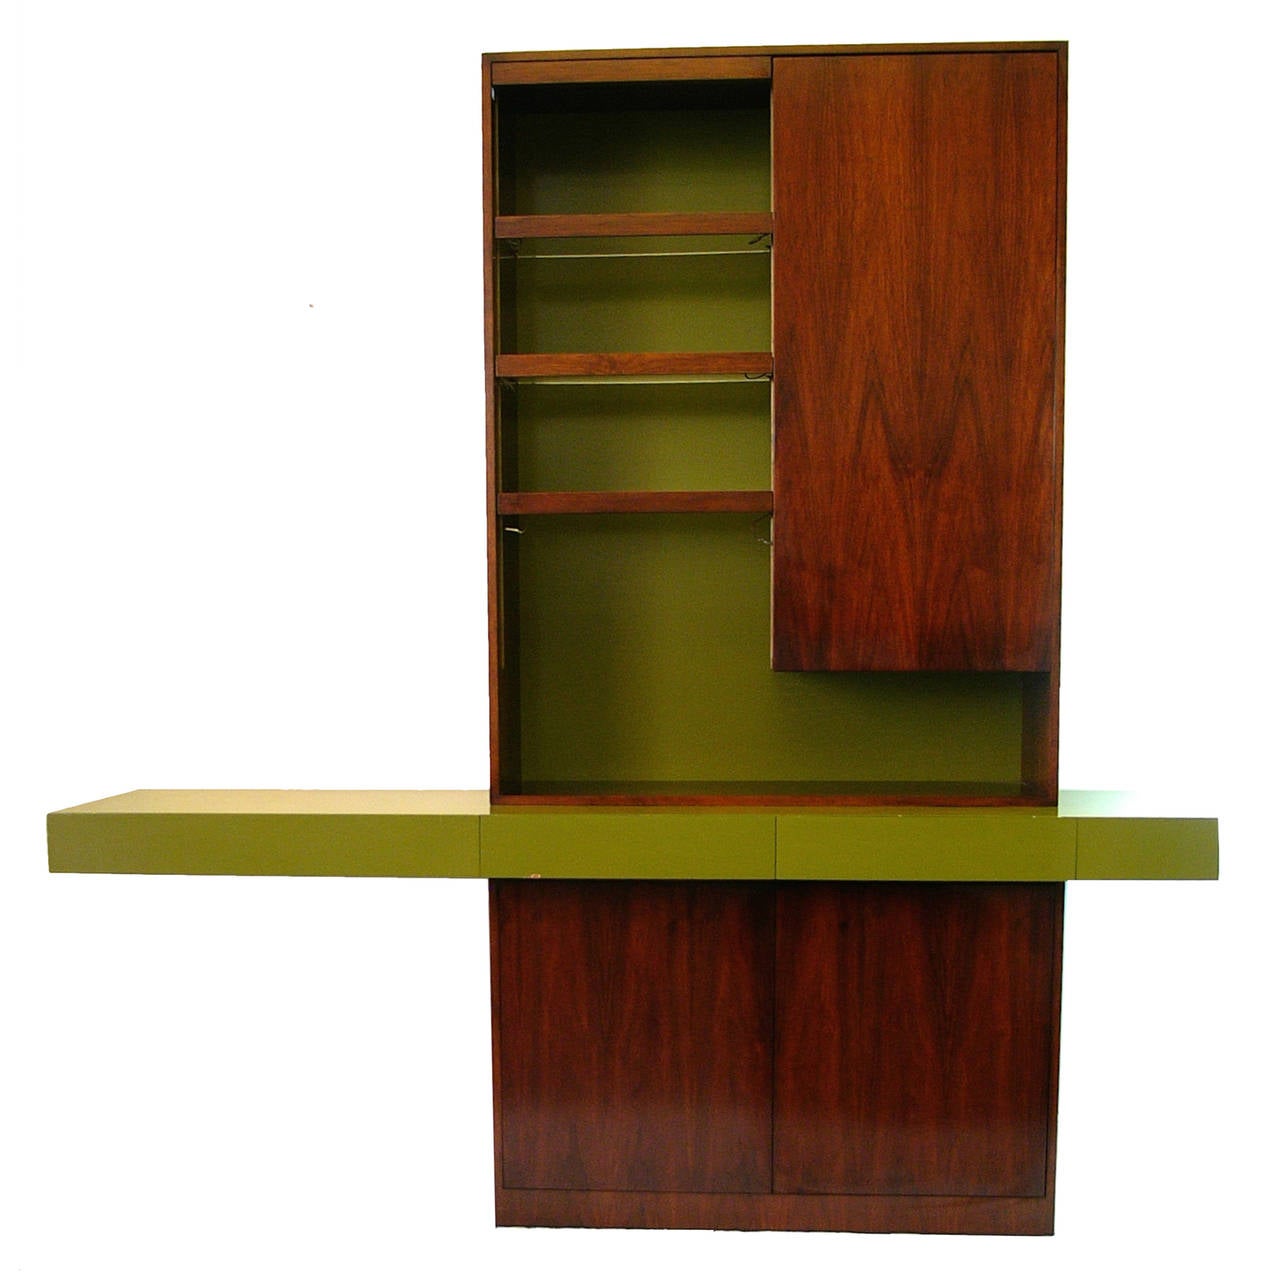 Sideboard or buffet display cabinet designed by Vladimir Kagan. Beautifully stained dark walnut with avocado lacquered detail. Interior drawers are sectioned and felt lined for flatware. Lighted lucite shelving. Stunning sculptural piece